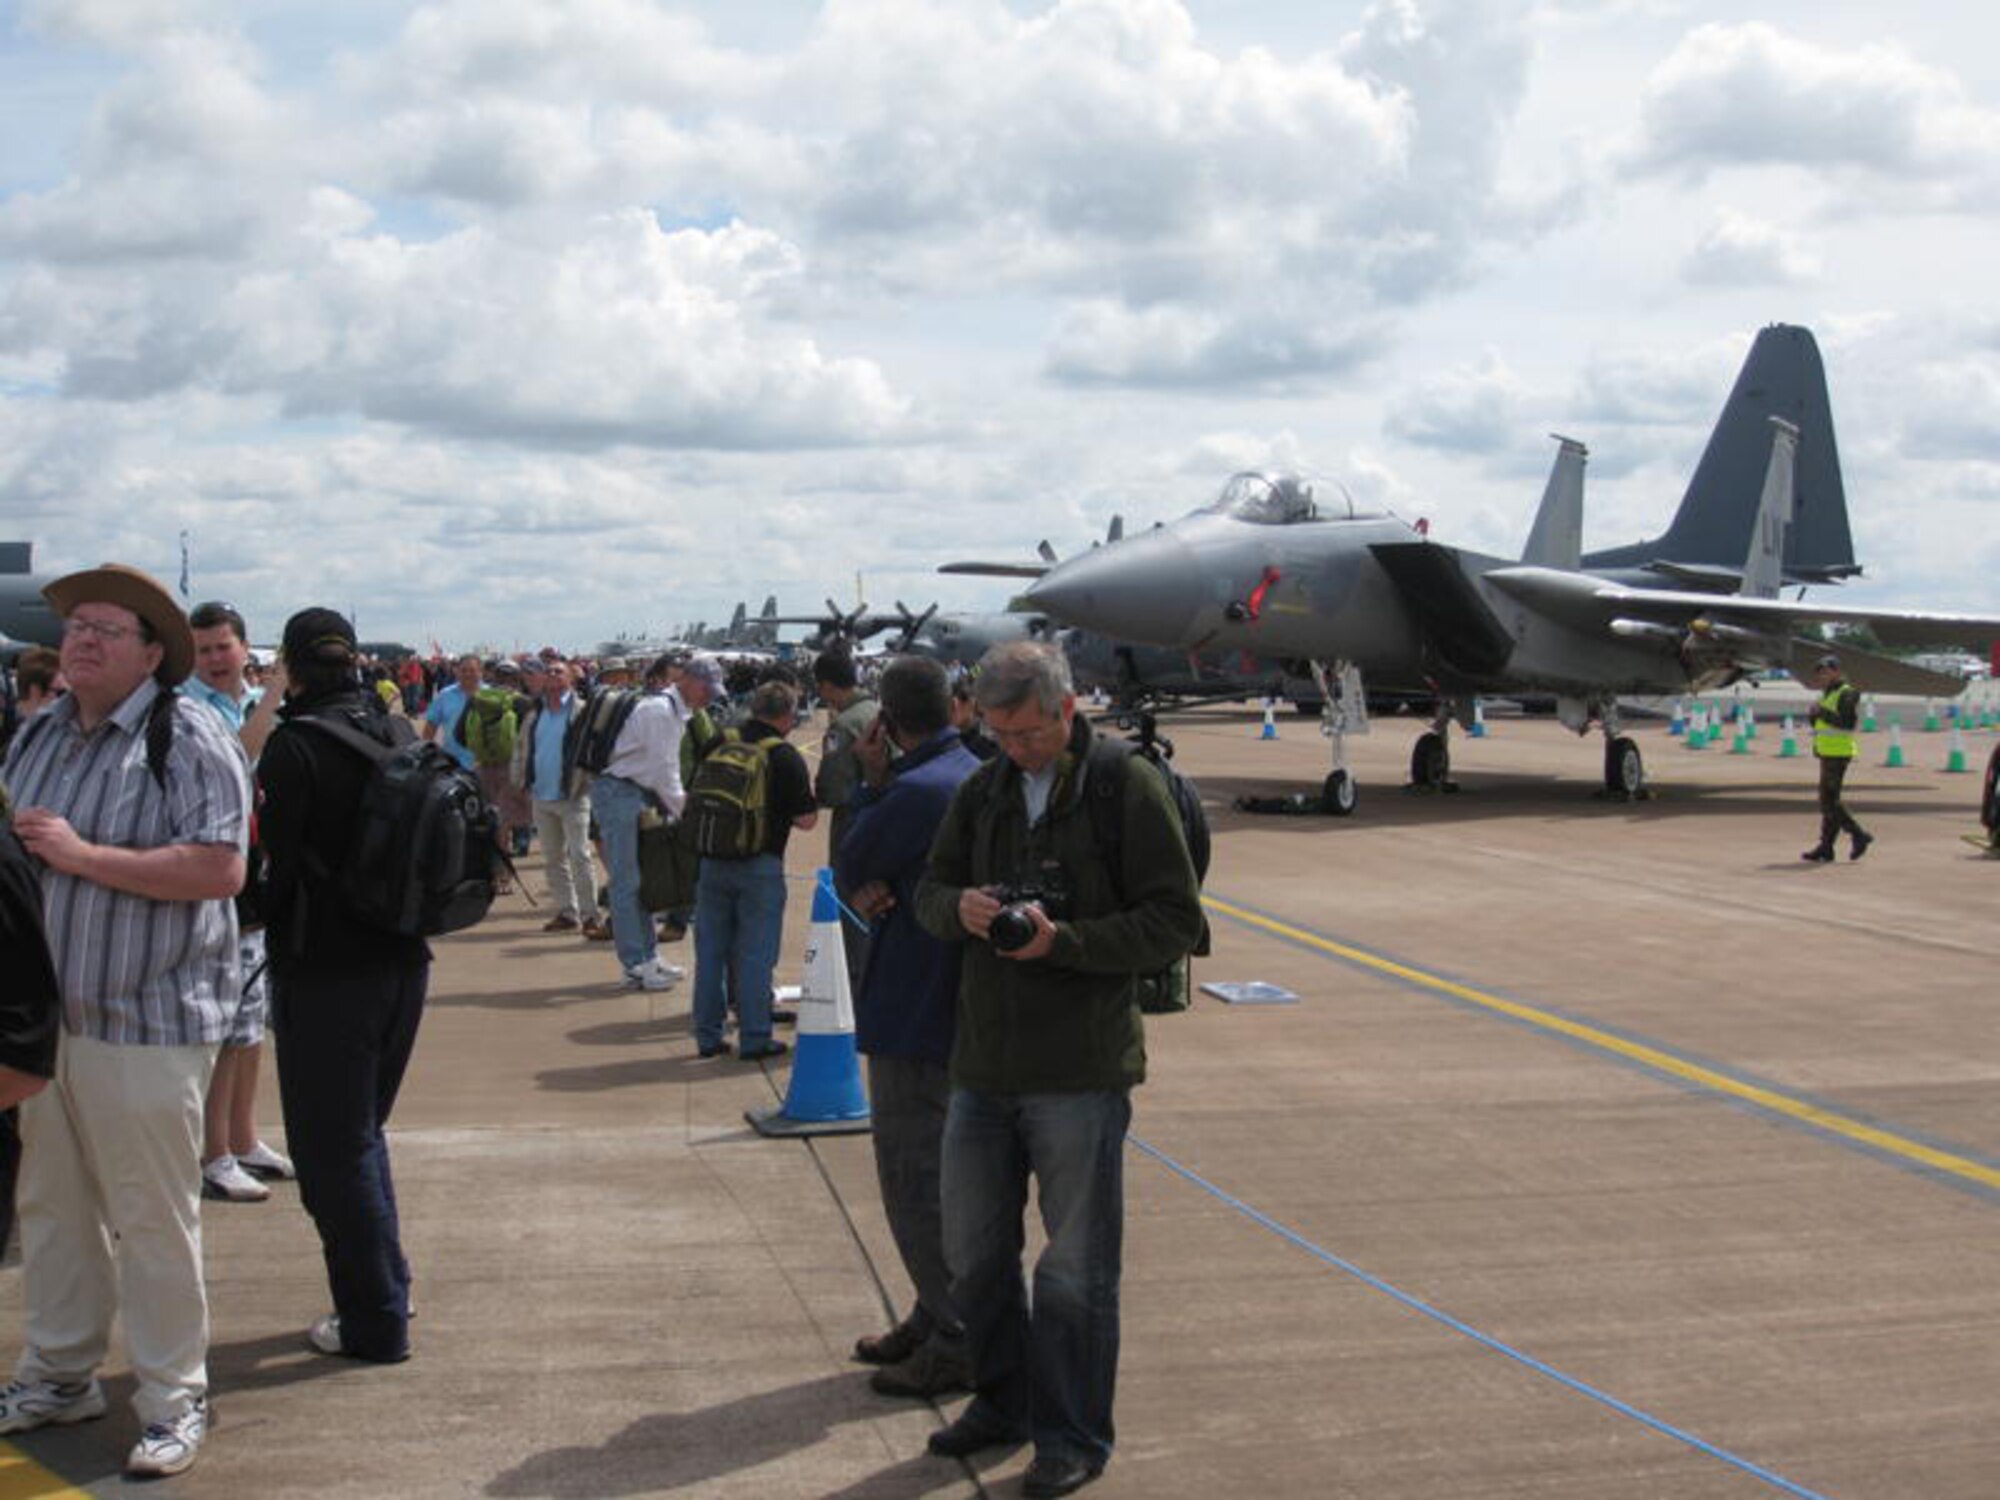 Visitors of the Royal International Air Tattoo take photos of an F-15 Eagle based out of RAF Lakenheath, United Kingdom, July 17, 2010. RIAT is being held at RAF Fairford and boast itself as "the world's largest military airshow."  (U.S. Air Force photo/Chief Master Sgt. Greg Wade) 